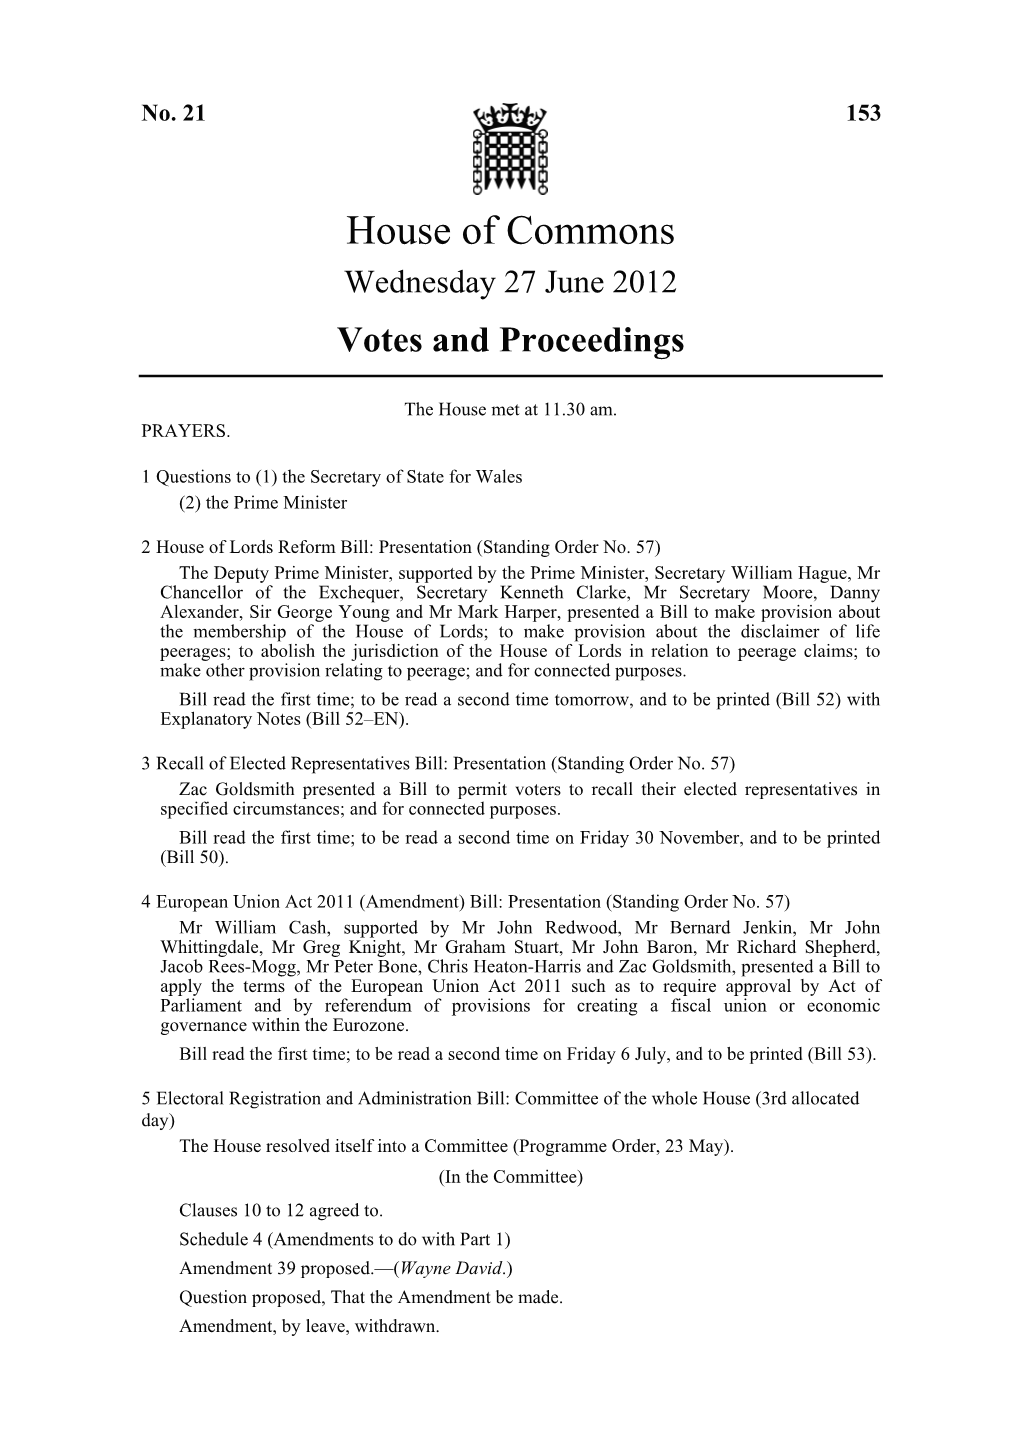 House of Commons Wednesday 27 June 2012 Votes and Proceedings